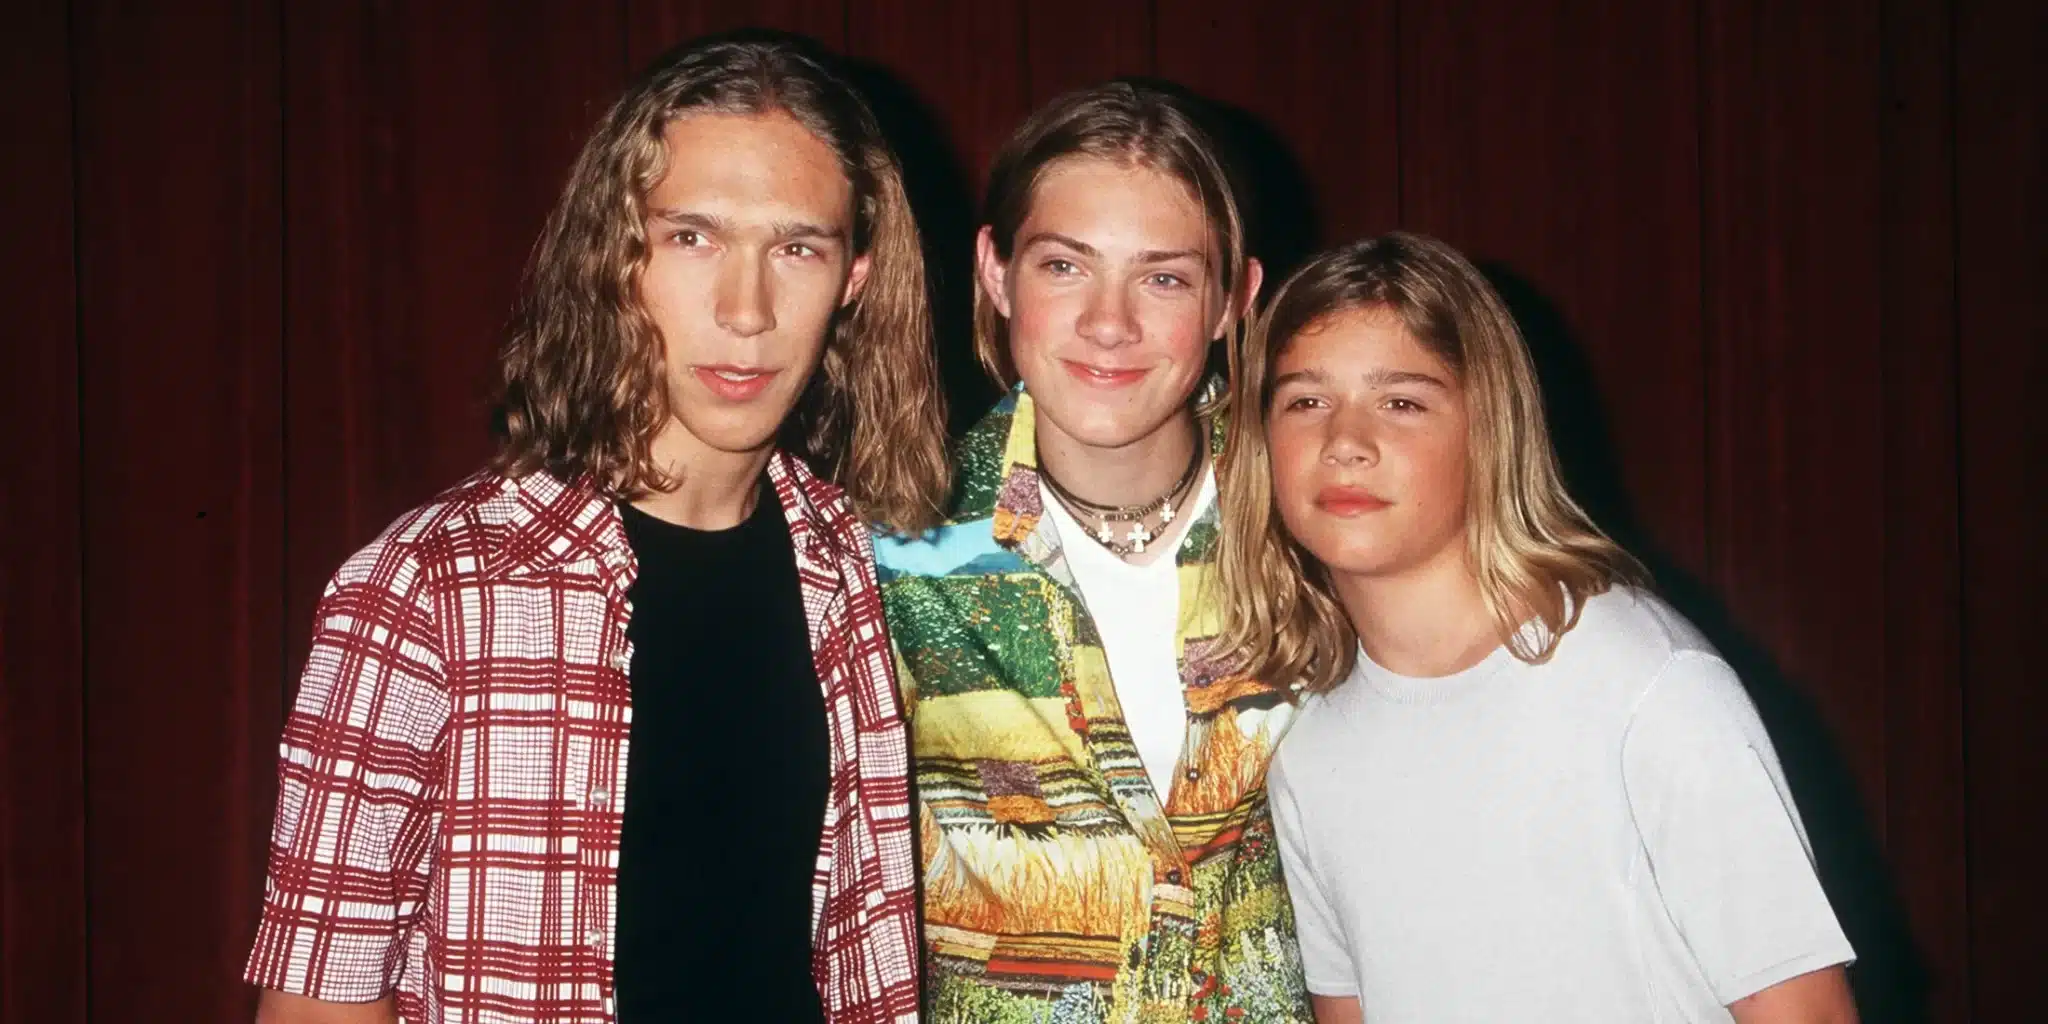 Who Are the Hanson Brothers